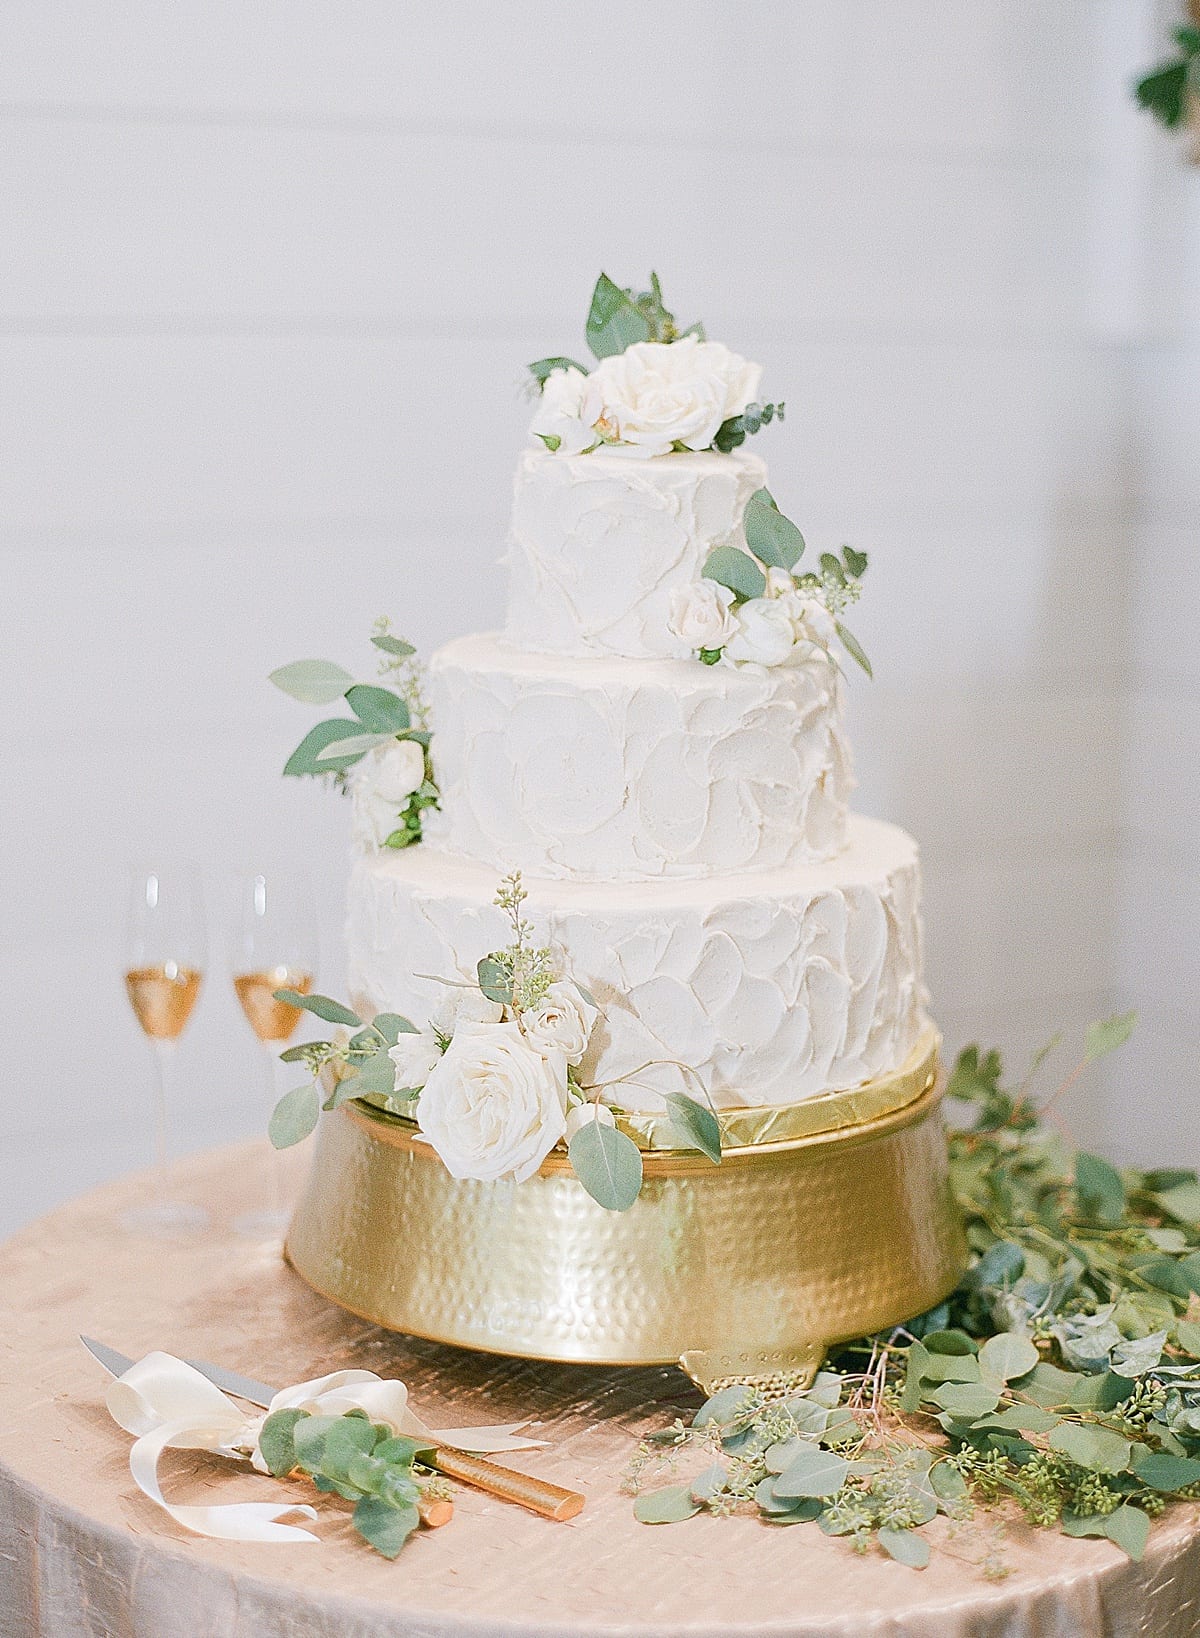 White Wedding Cake with White Flowers on Gold Cake Stand Photo